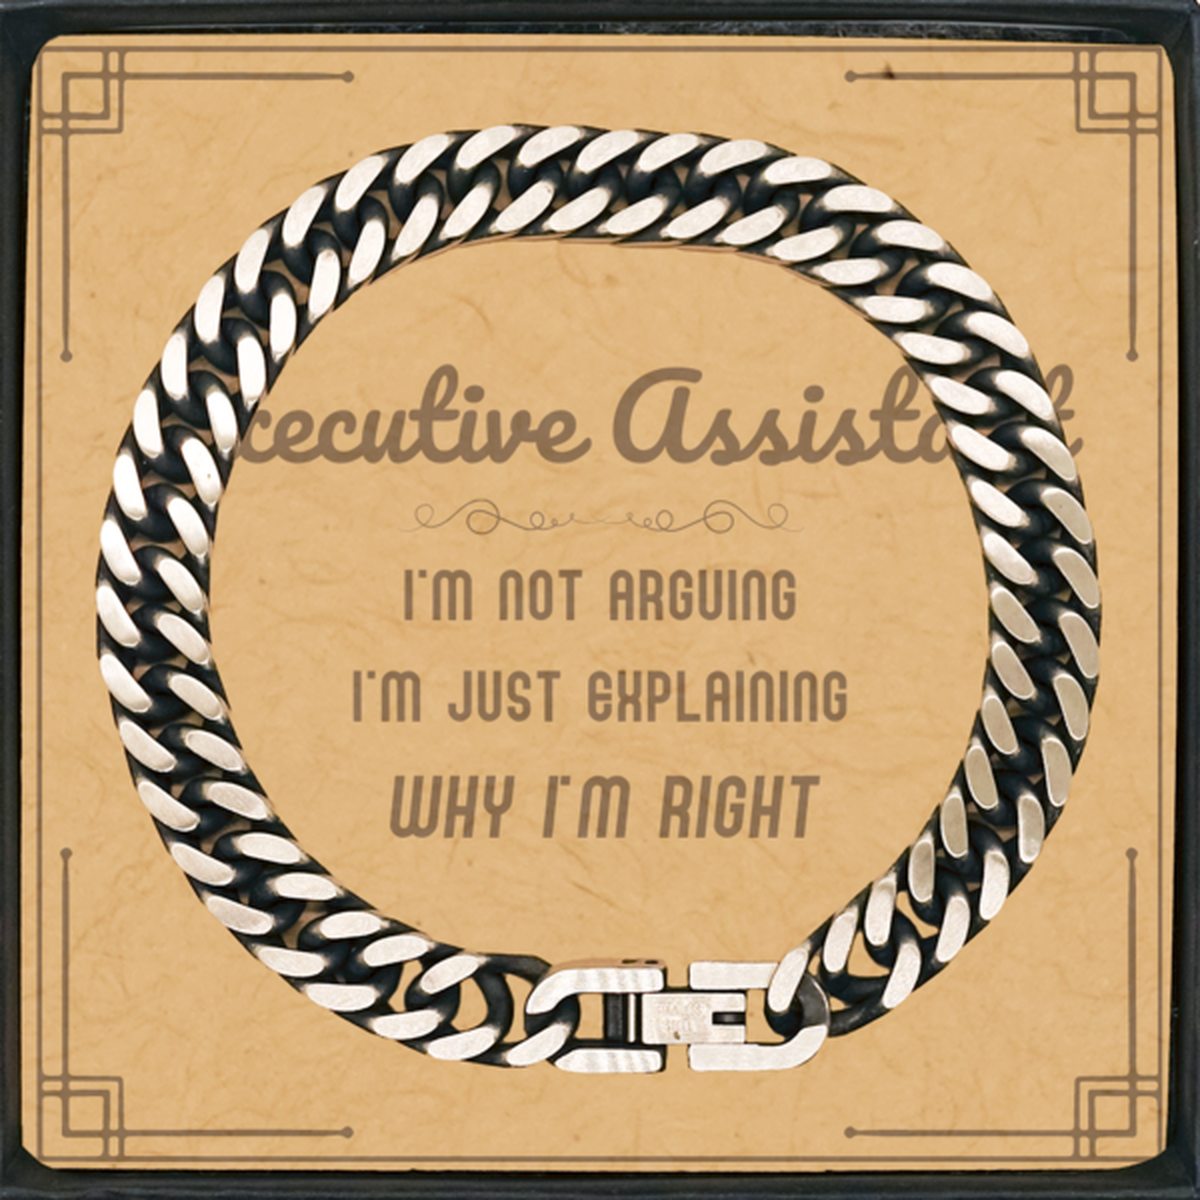 Executive Assistant I'm not Arguing. I'm Just Explaining Why I'm RIGHT Cuban Link Chain Bracelet, Funny Saying Quote Executive Assistant Gifts For Executive Assistant Message Card Graduation Birthday Christmas Gifts for Men Women Coworker